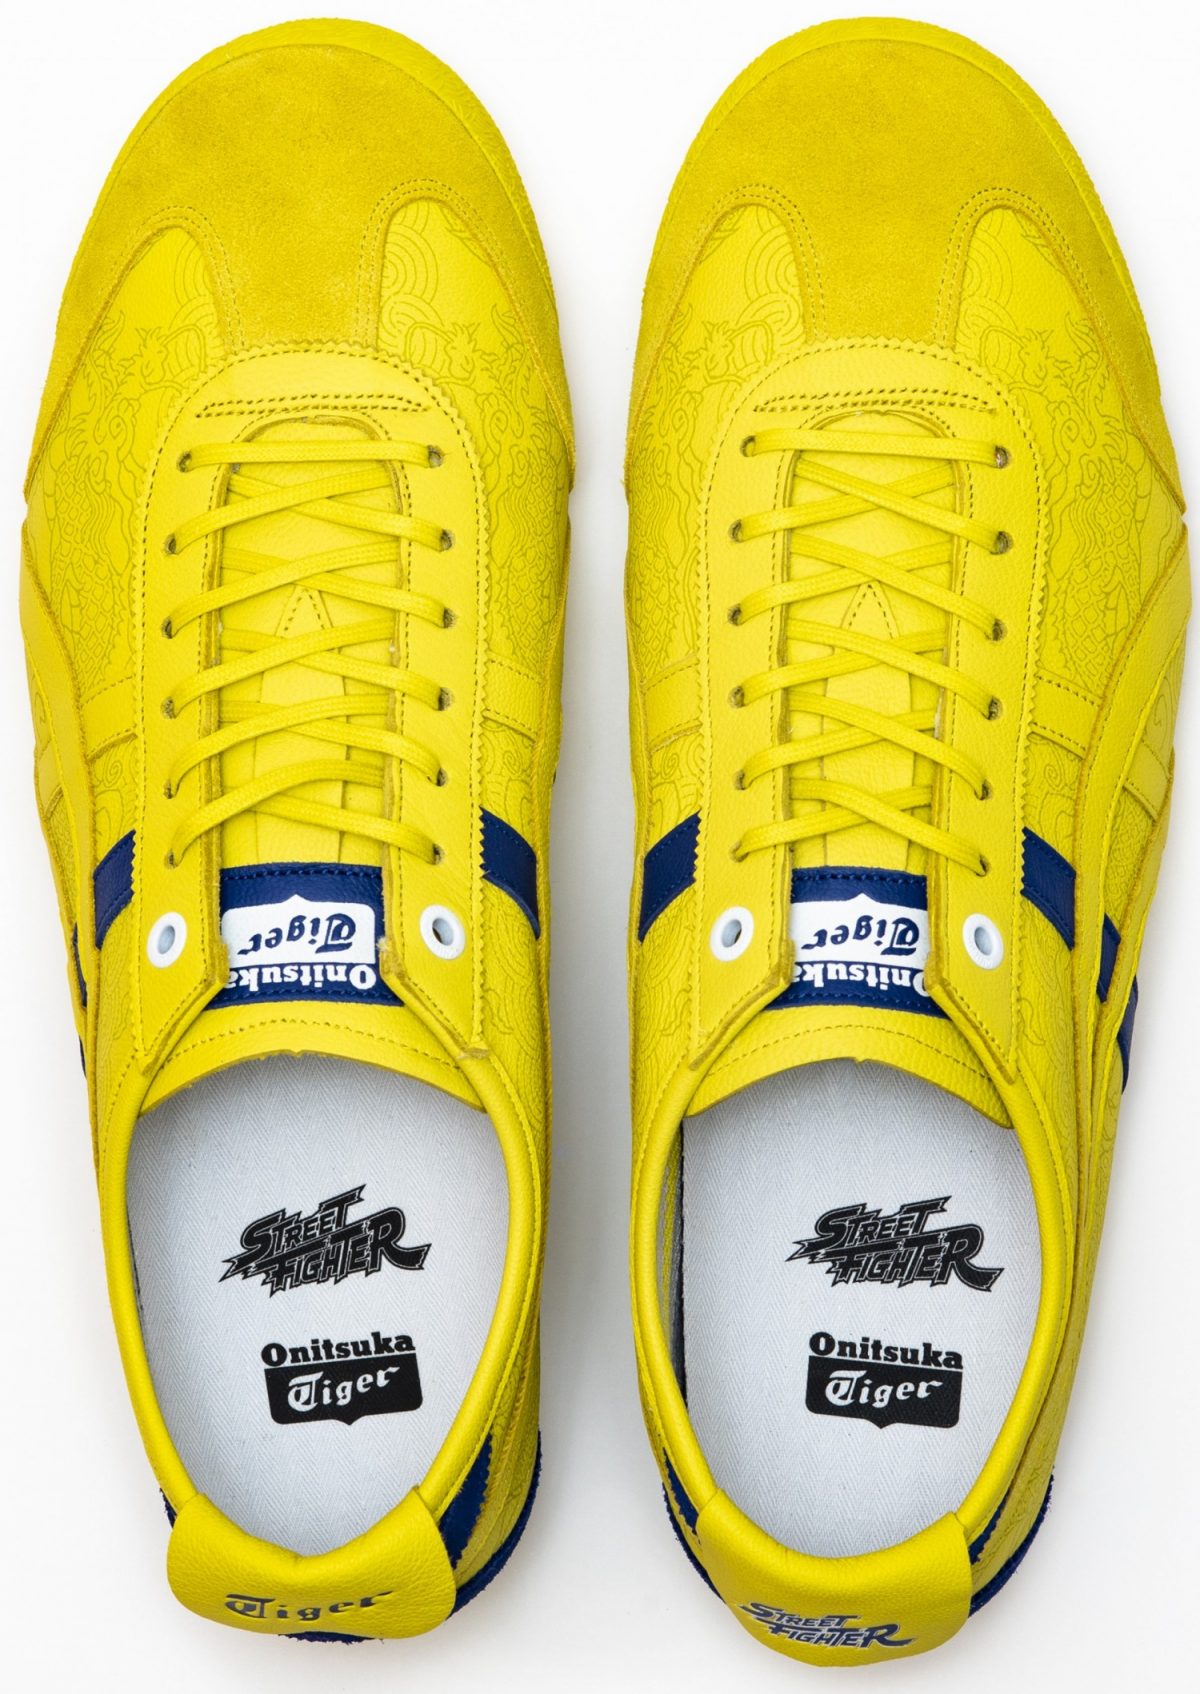 Get Your Lightning Kicks On With These Limited-Edition Onitsuka Tiger ...